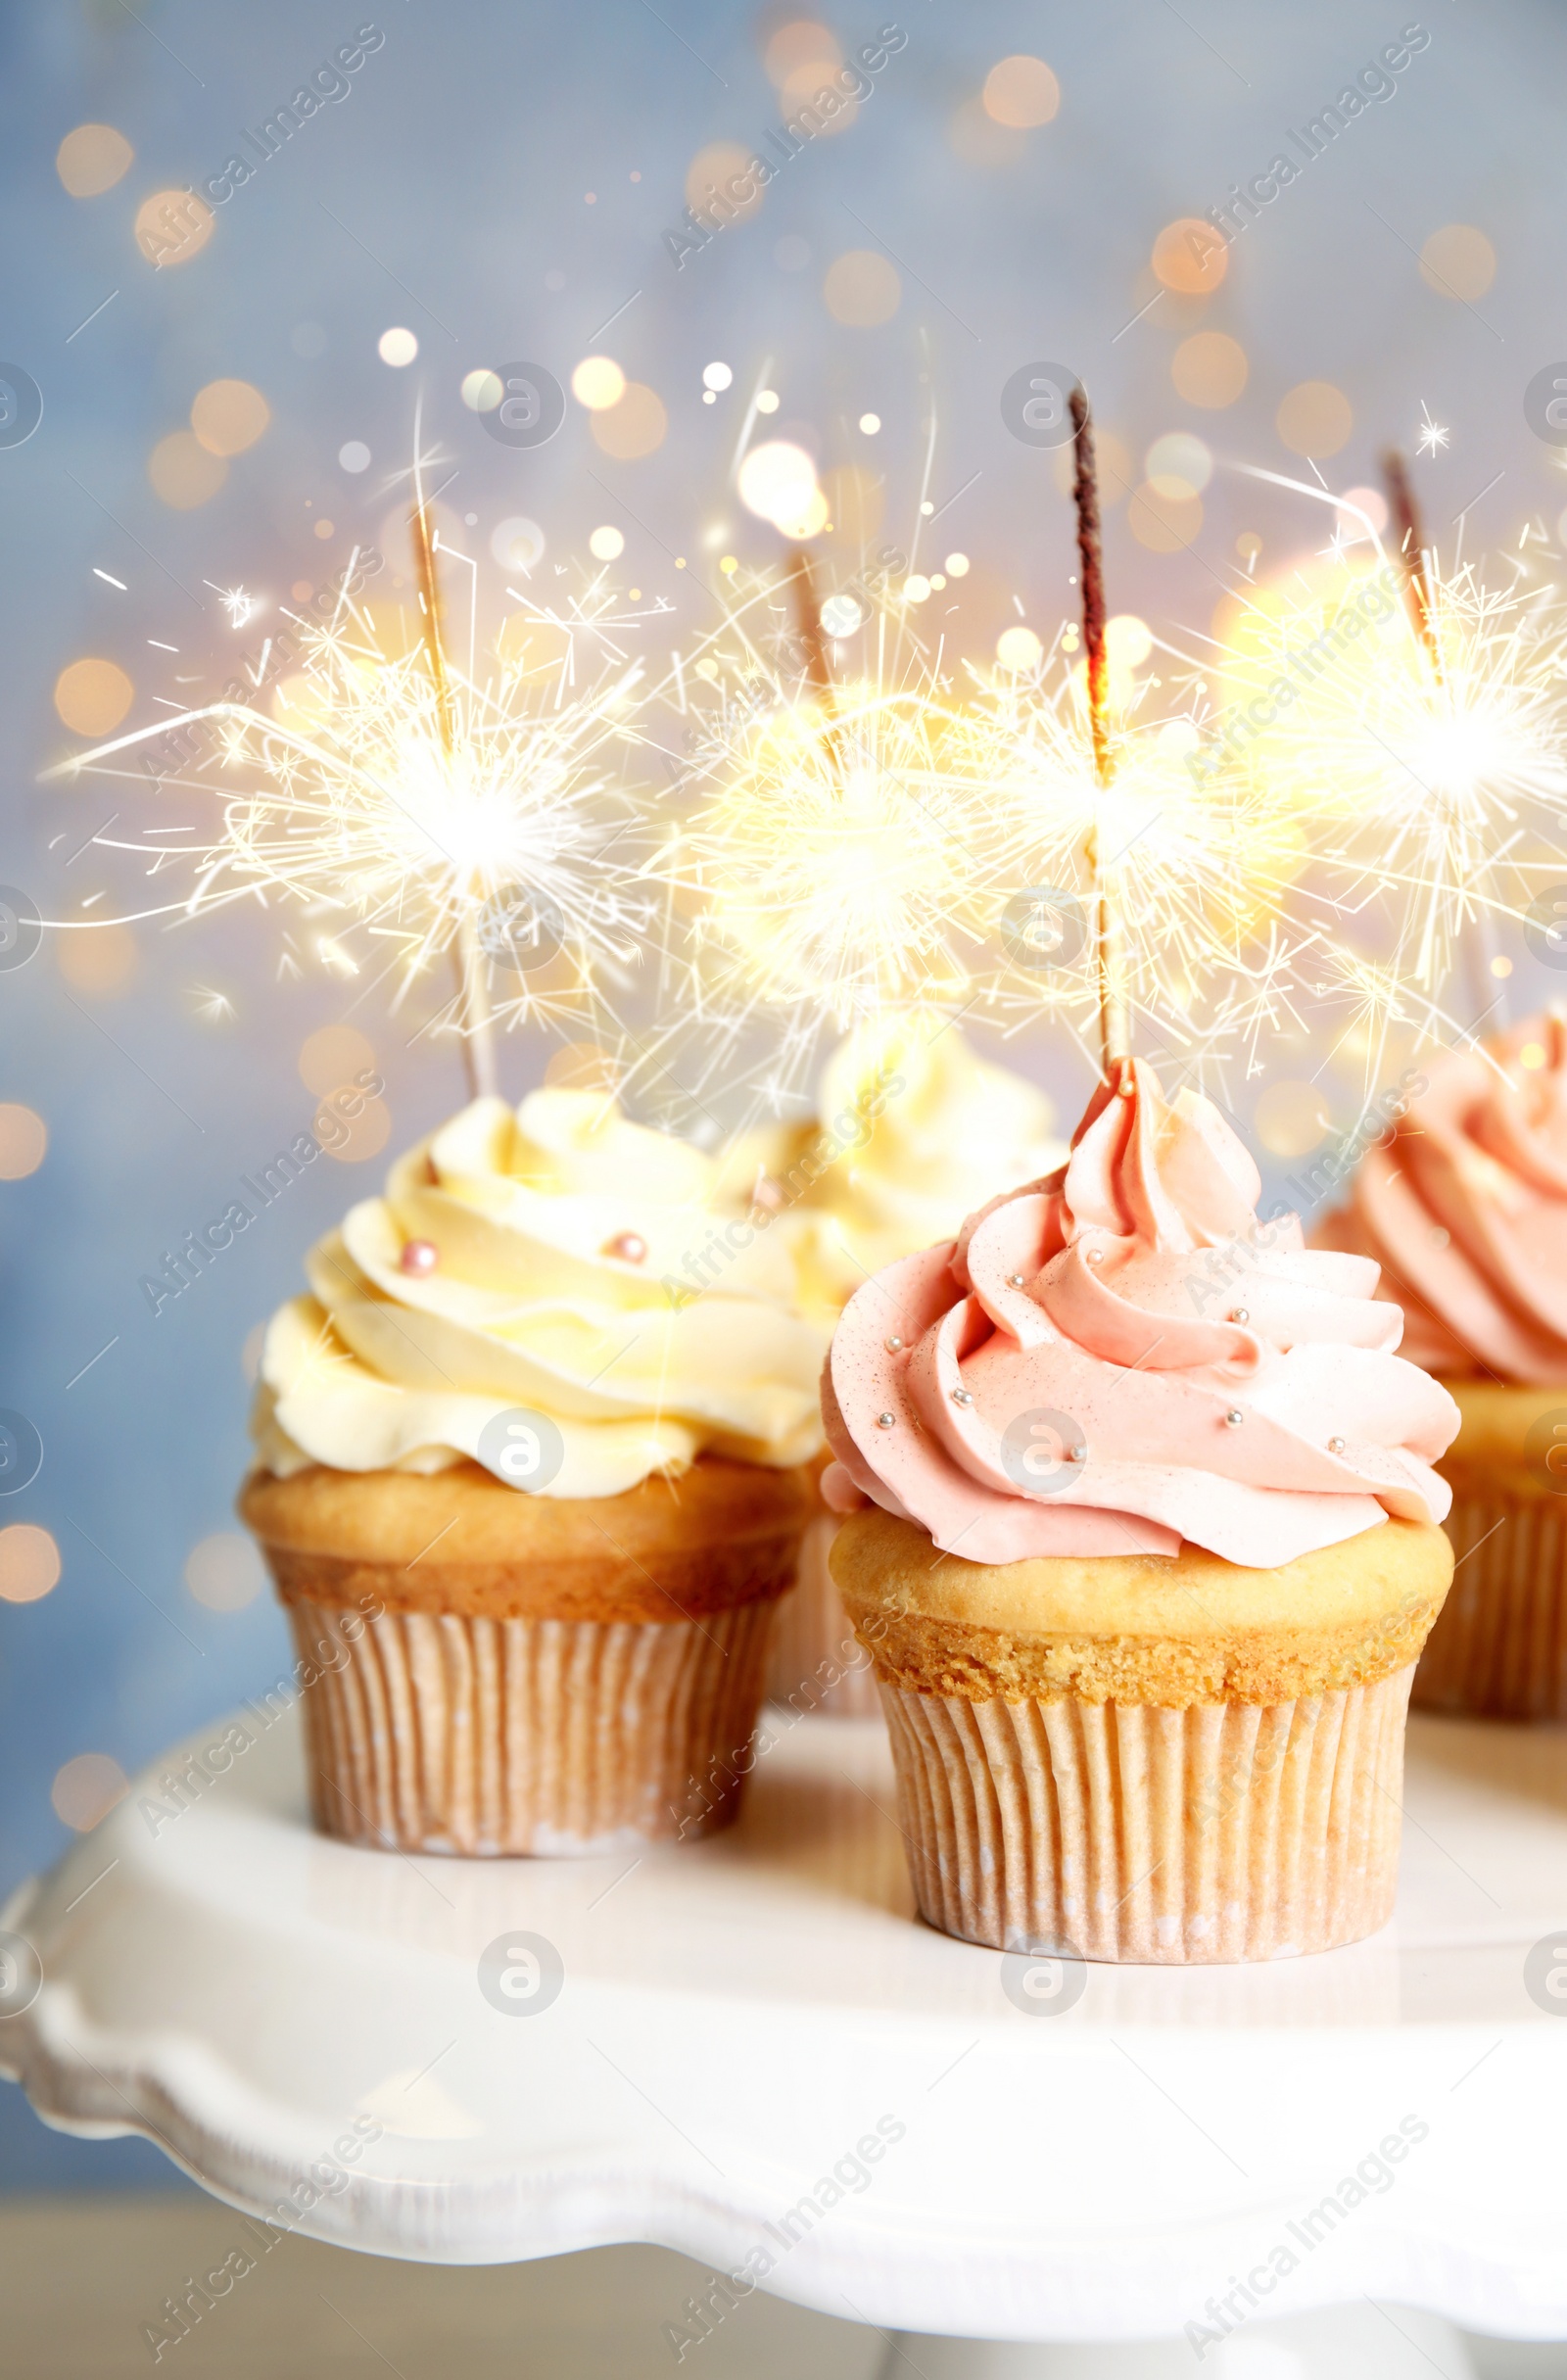 Image of Delicious birthday cupcakes with sparklers on stand against blurred background